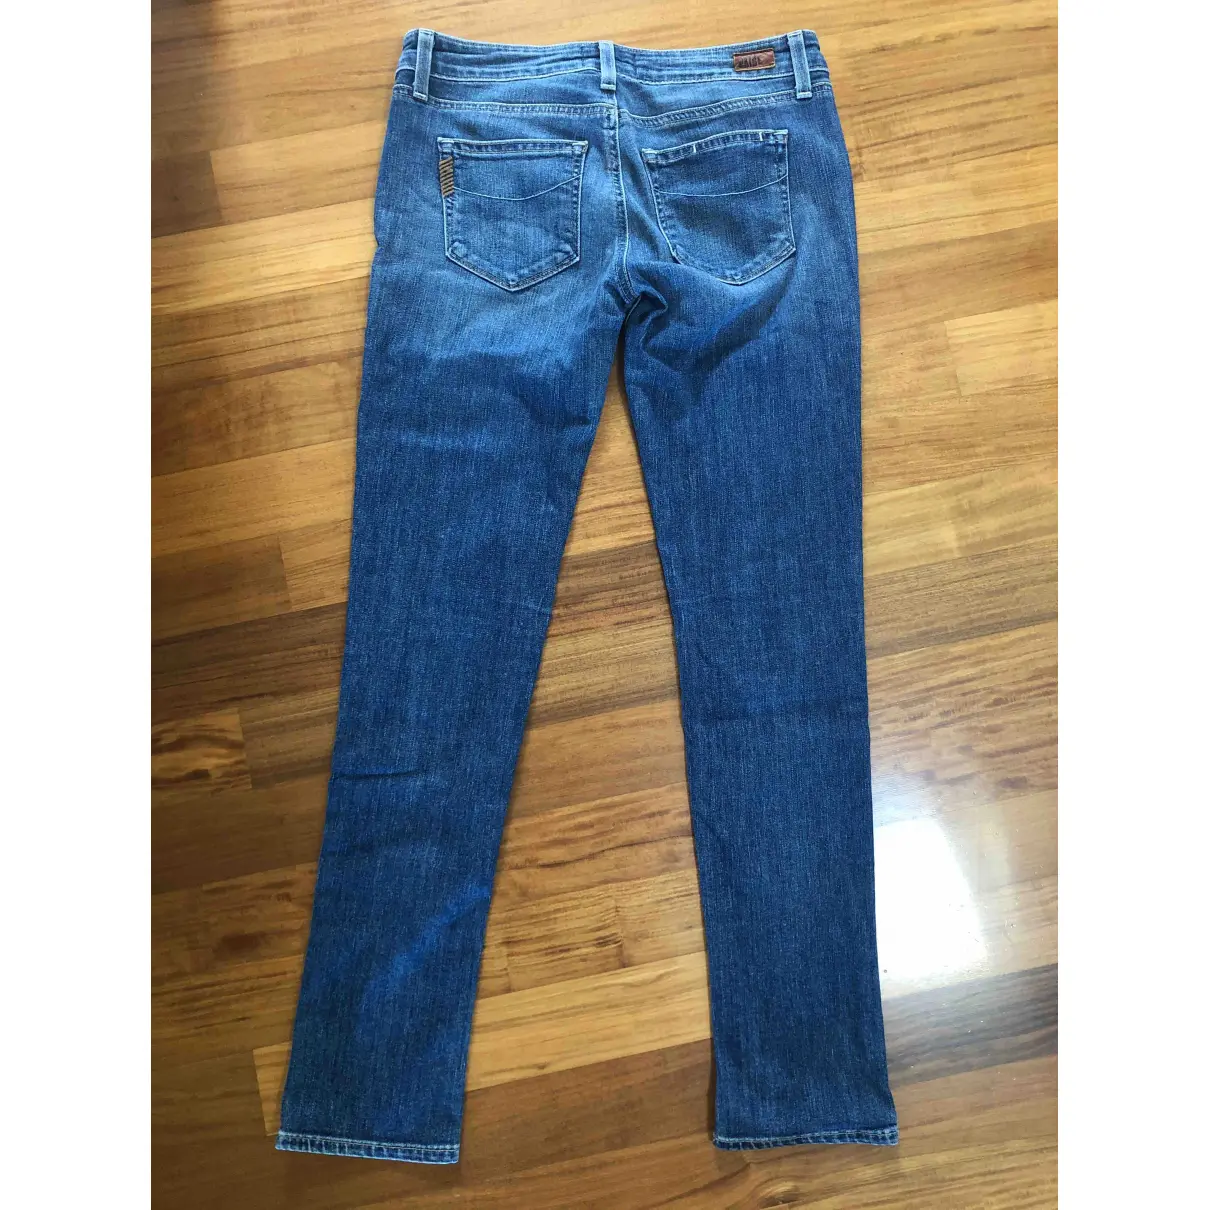 Buy Paige Jeans Straight jeans online